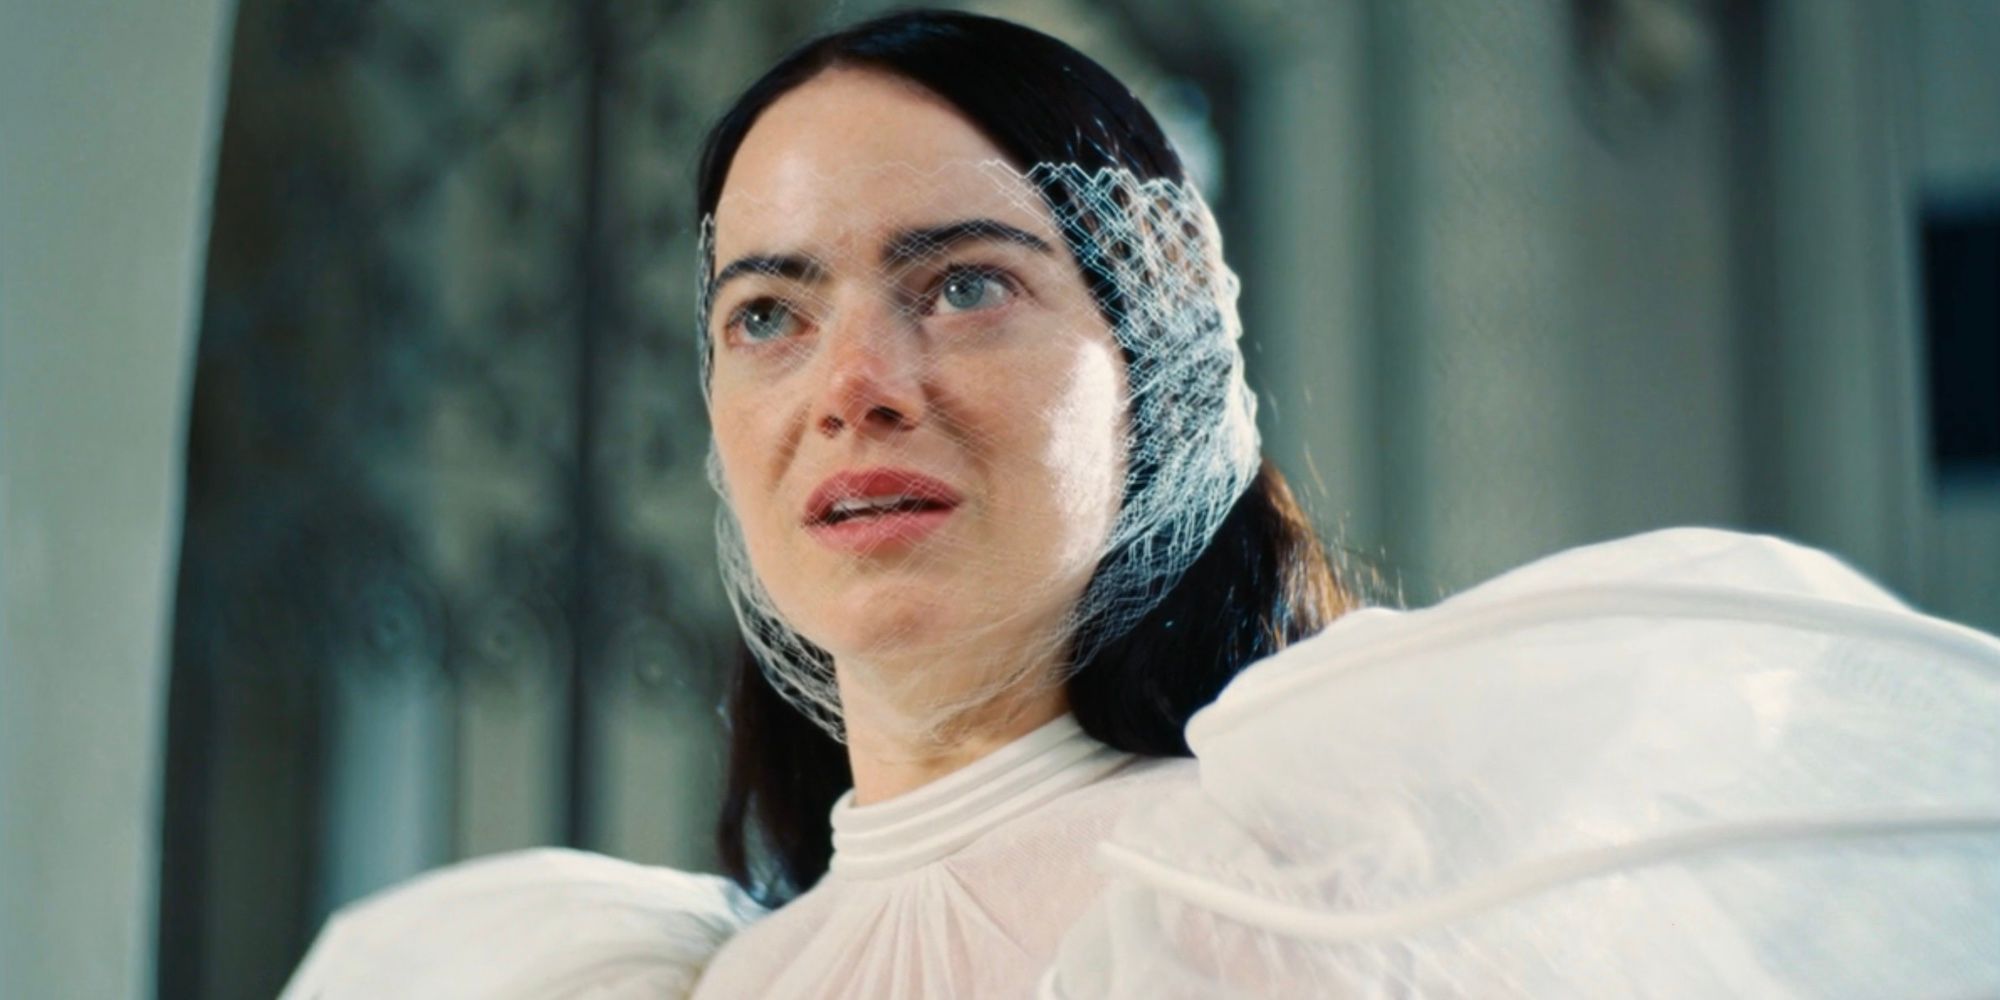 Bella Baxter (Emma Stone) wears a lace veil over her face on her wedding day in Poor Things.